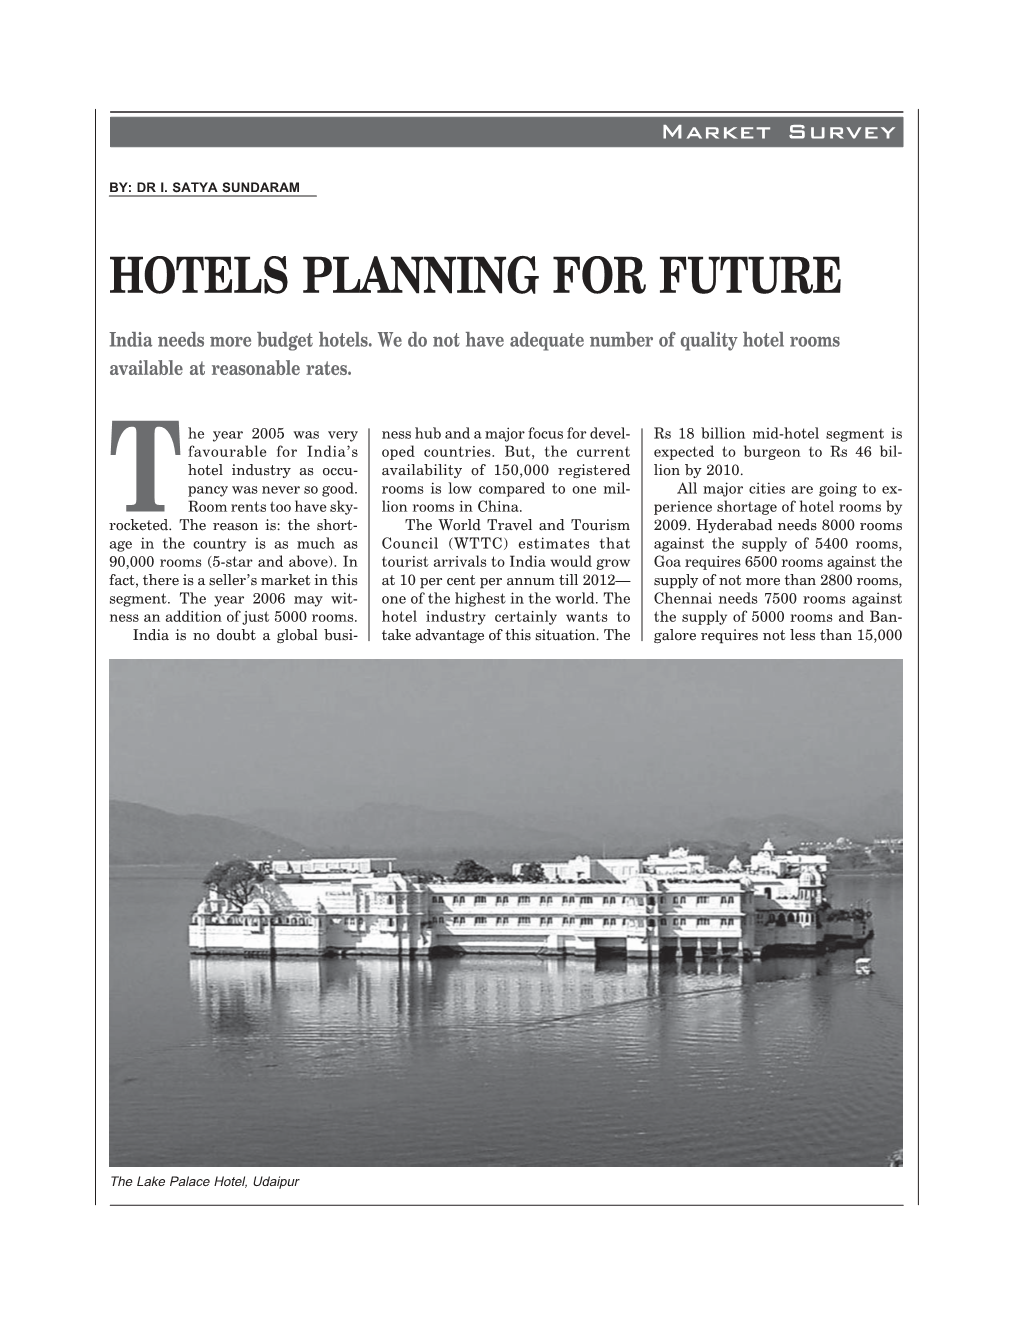 Hotels Planning for Future